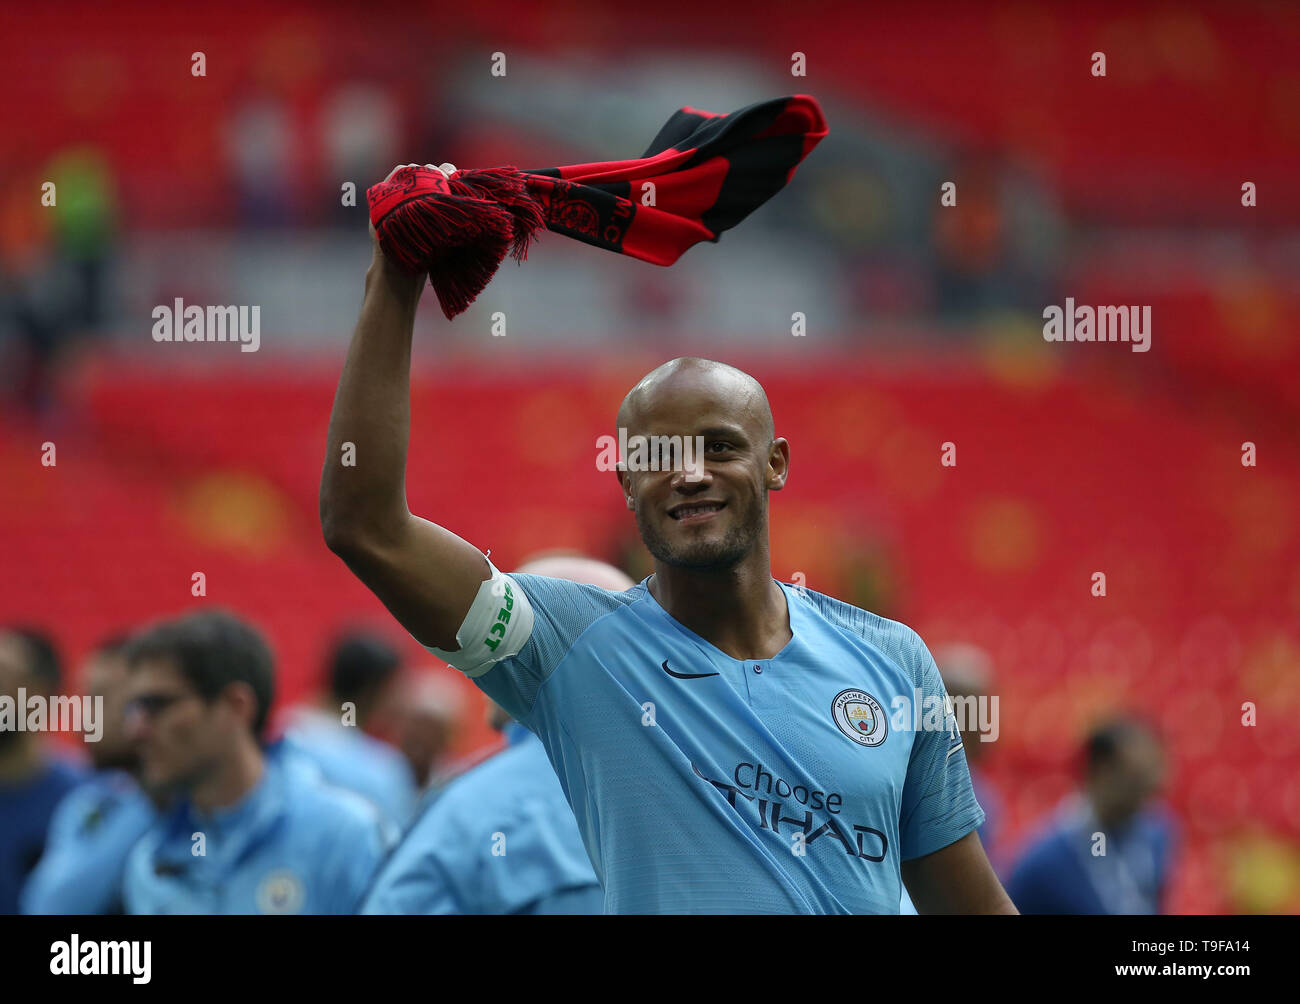 London, UK. 18 May 2019 Manchester City's Vincent Kompany celebrates victory during the Emirates FA Cup Final between Manchester City and Watford at the Wembley Stadium in London. 18 May 2019. EDITORIAL USE ONLY. No use with unauthorized audio, video, data, fixture lists, club/league logos or 'live' services. Online in-match use limited to 120 images, no video emulation. No use in betting, games or single club/league/player publications. Credit: James Boardman / Alamy Live News Stock Photo